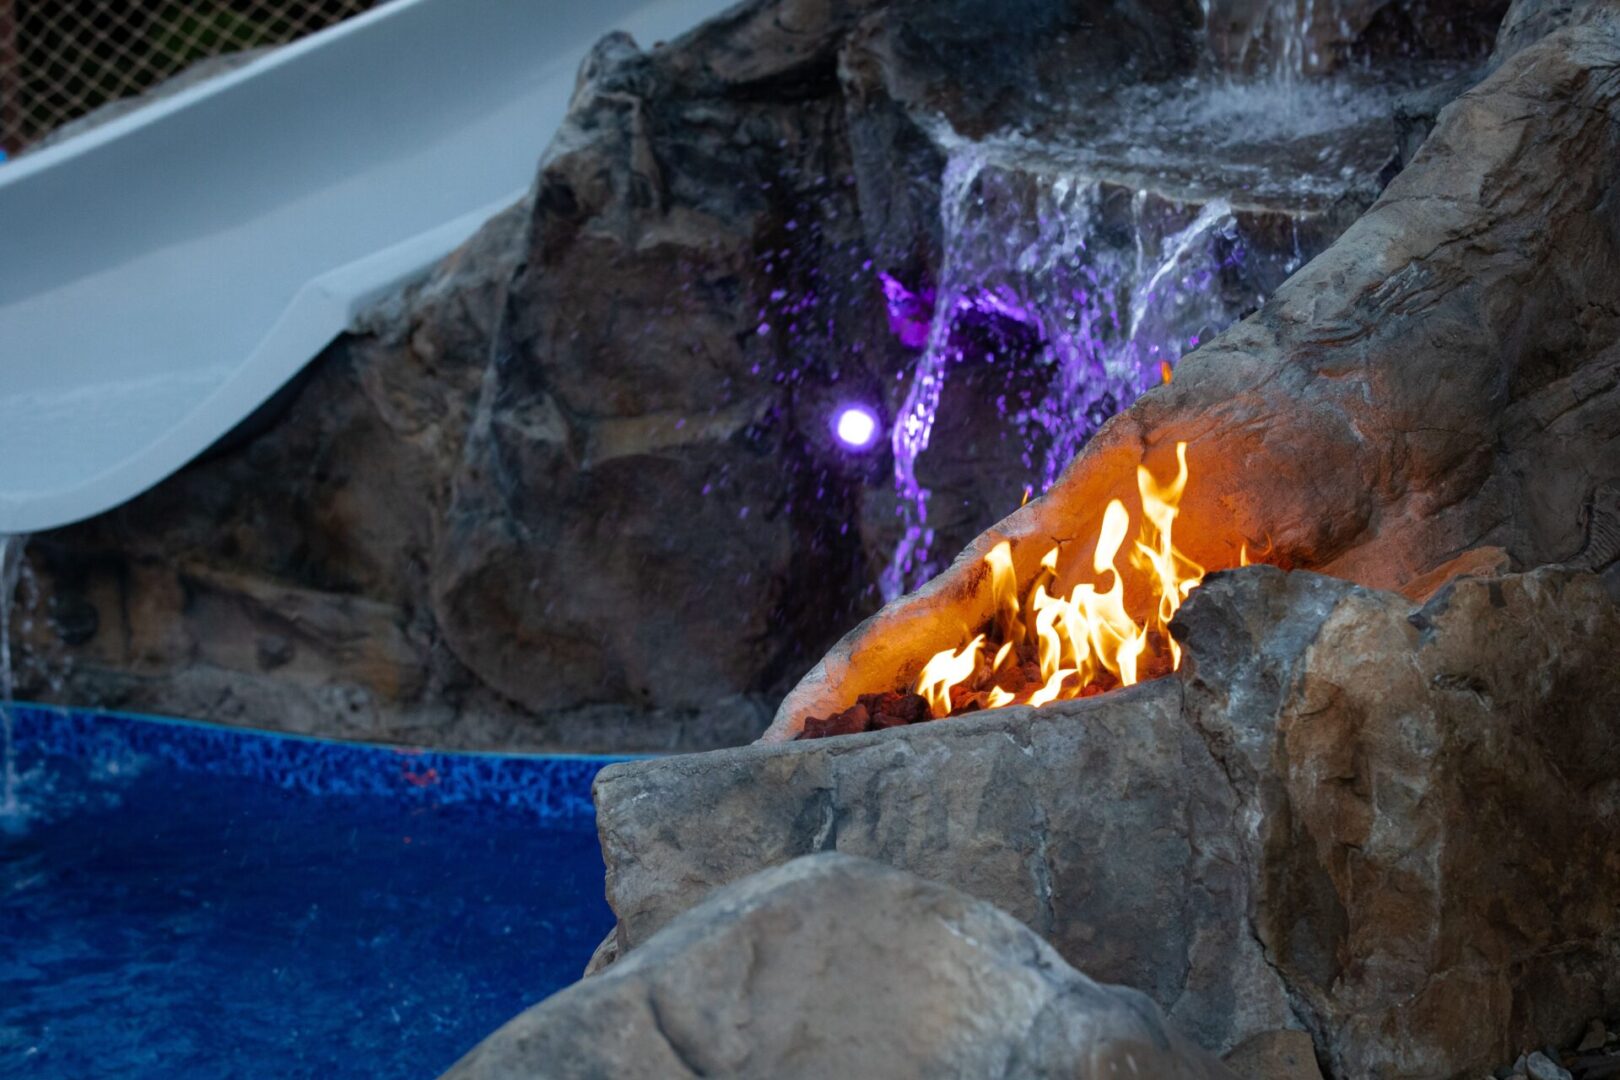 A fire pit with purple lights and water slide.